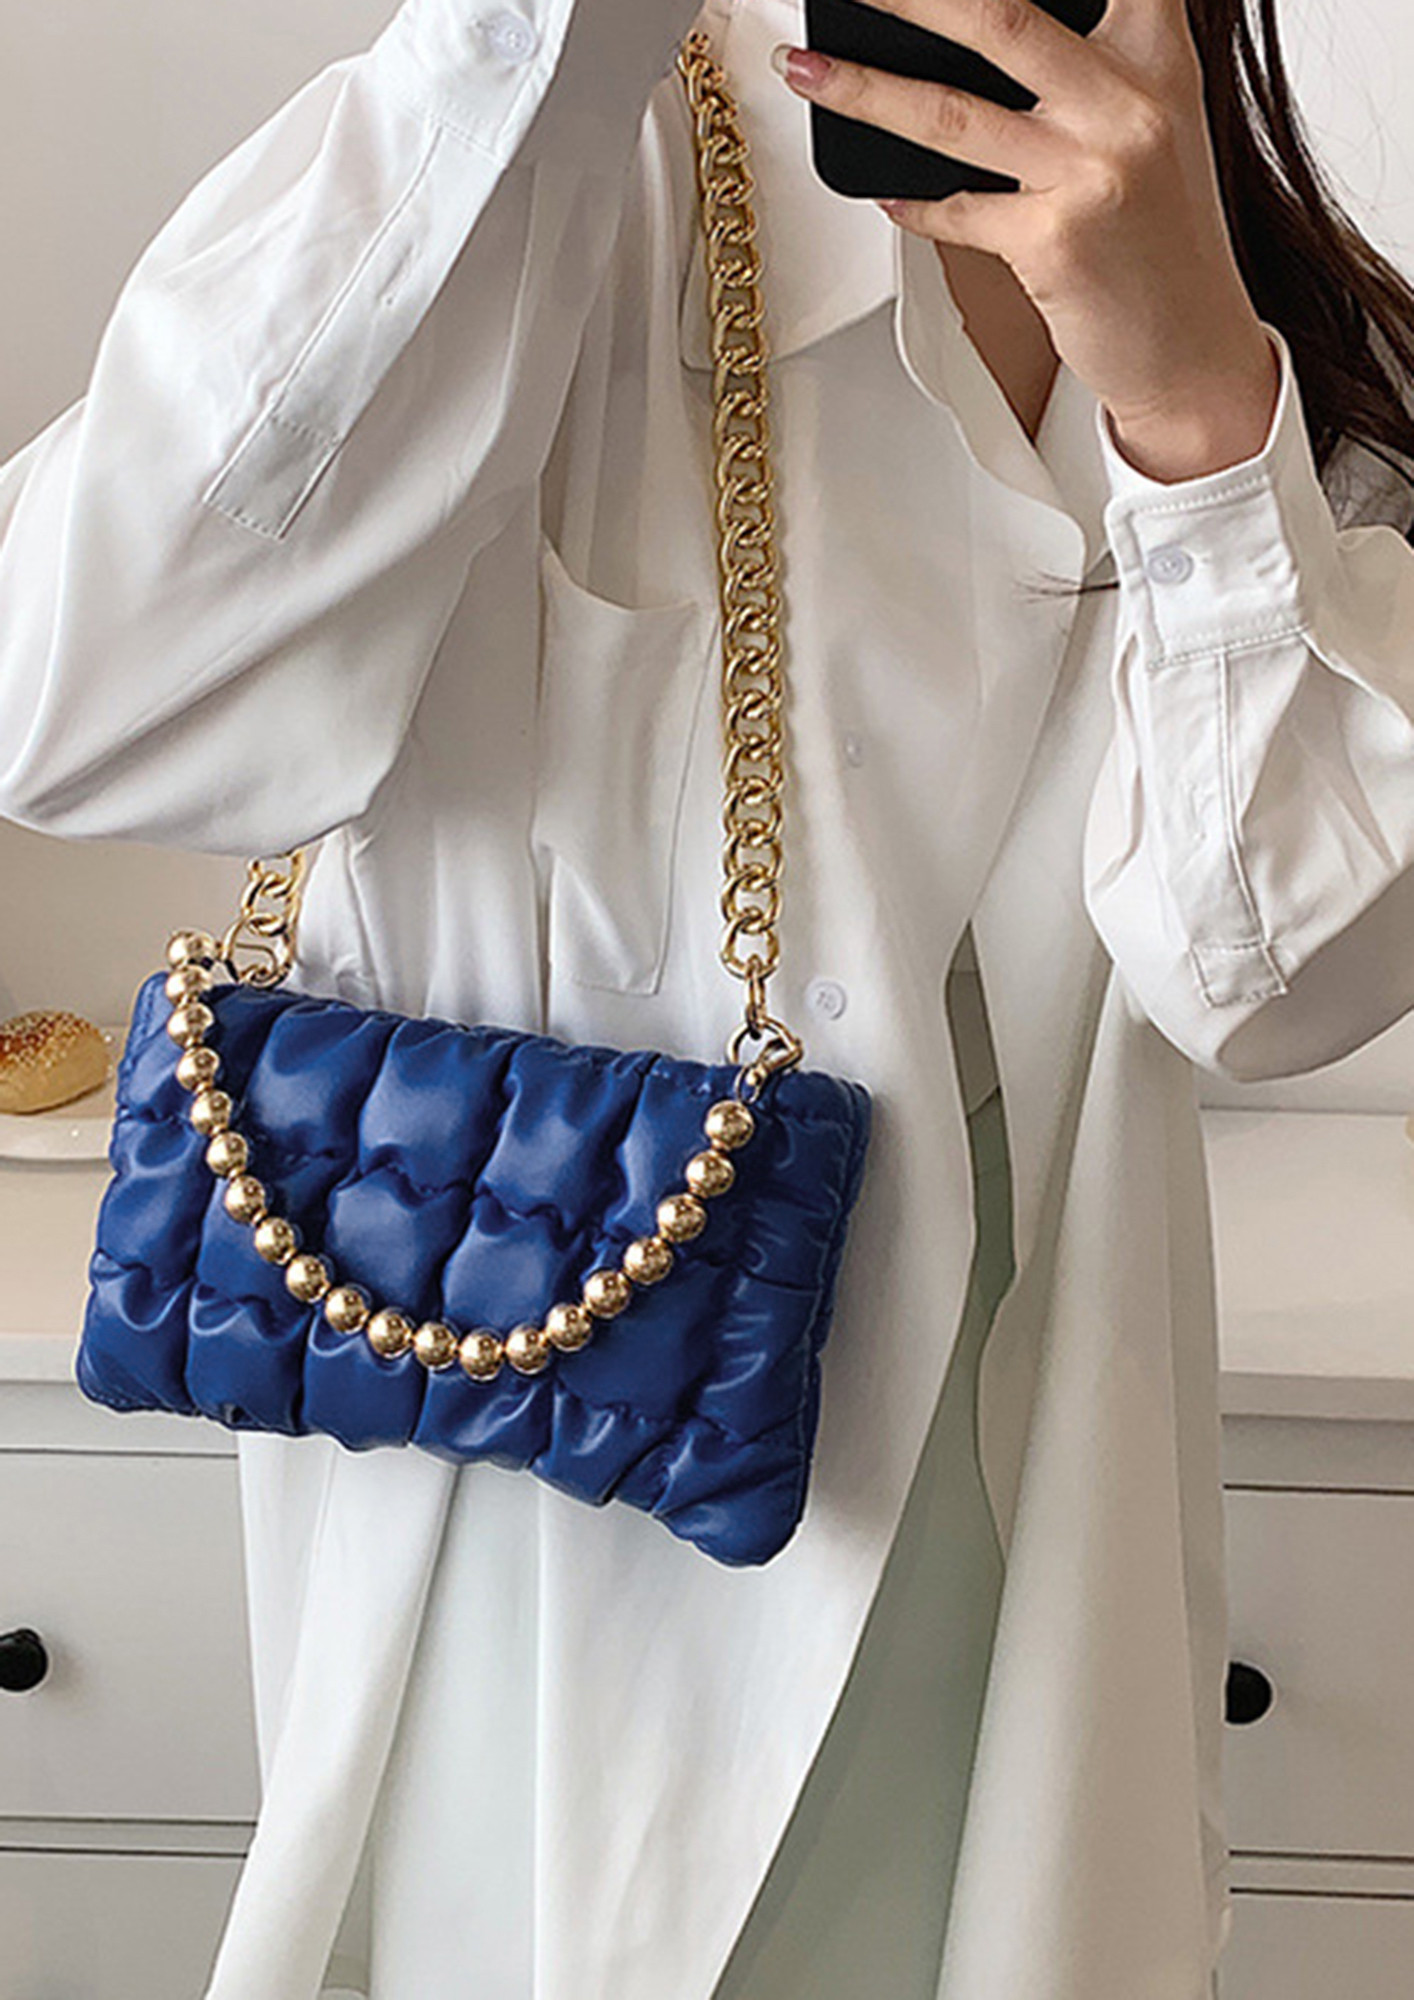 WHAT A QUILTED LEATHER BLUE HANDBAG